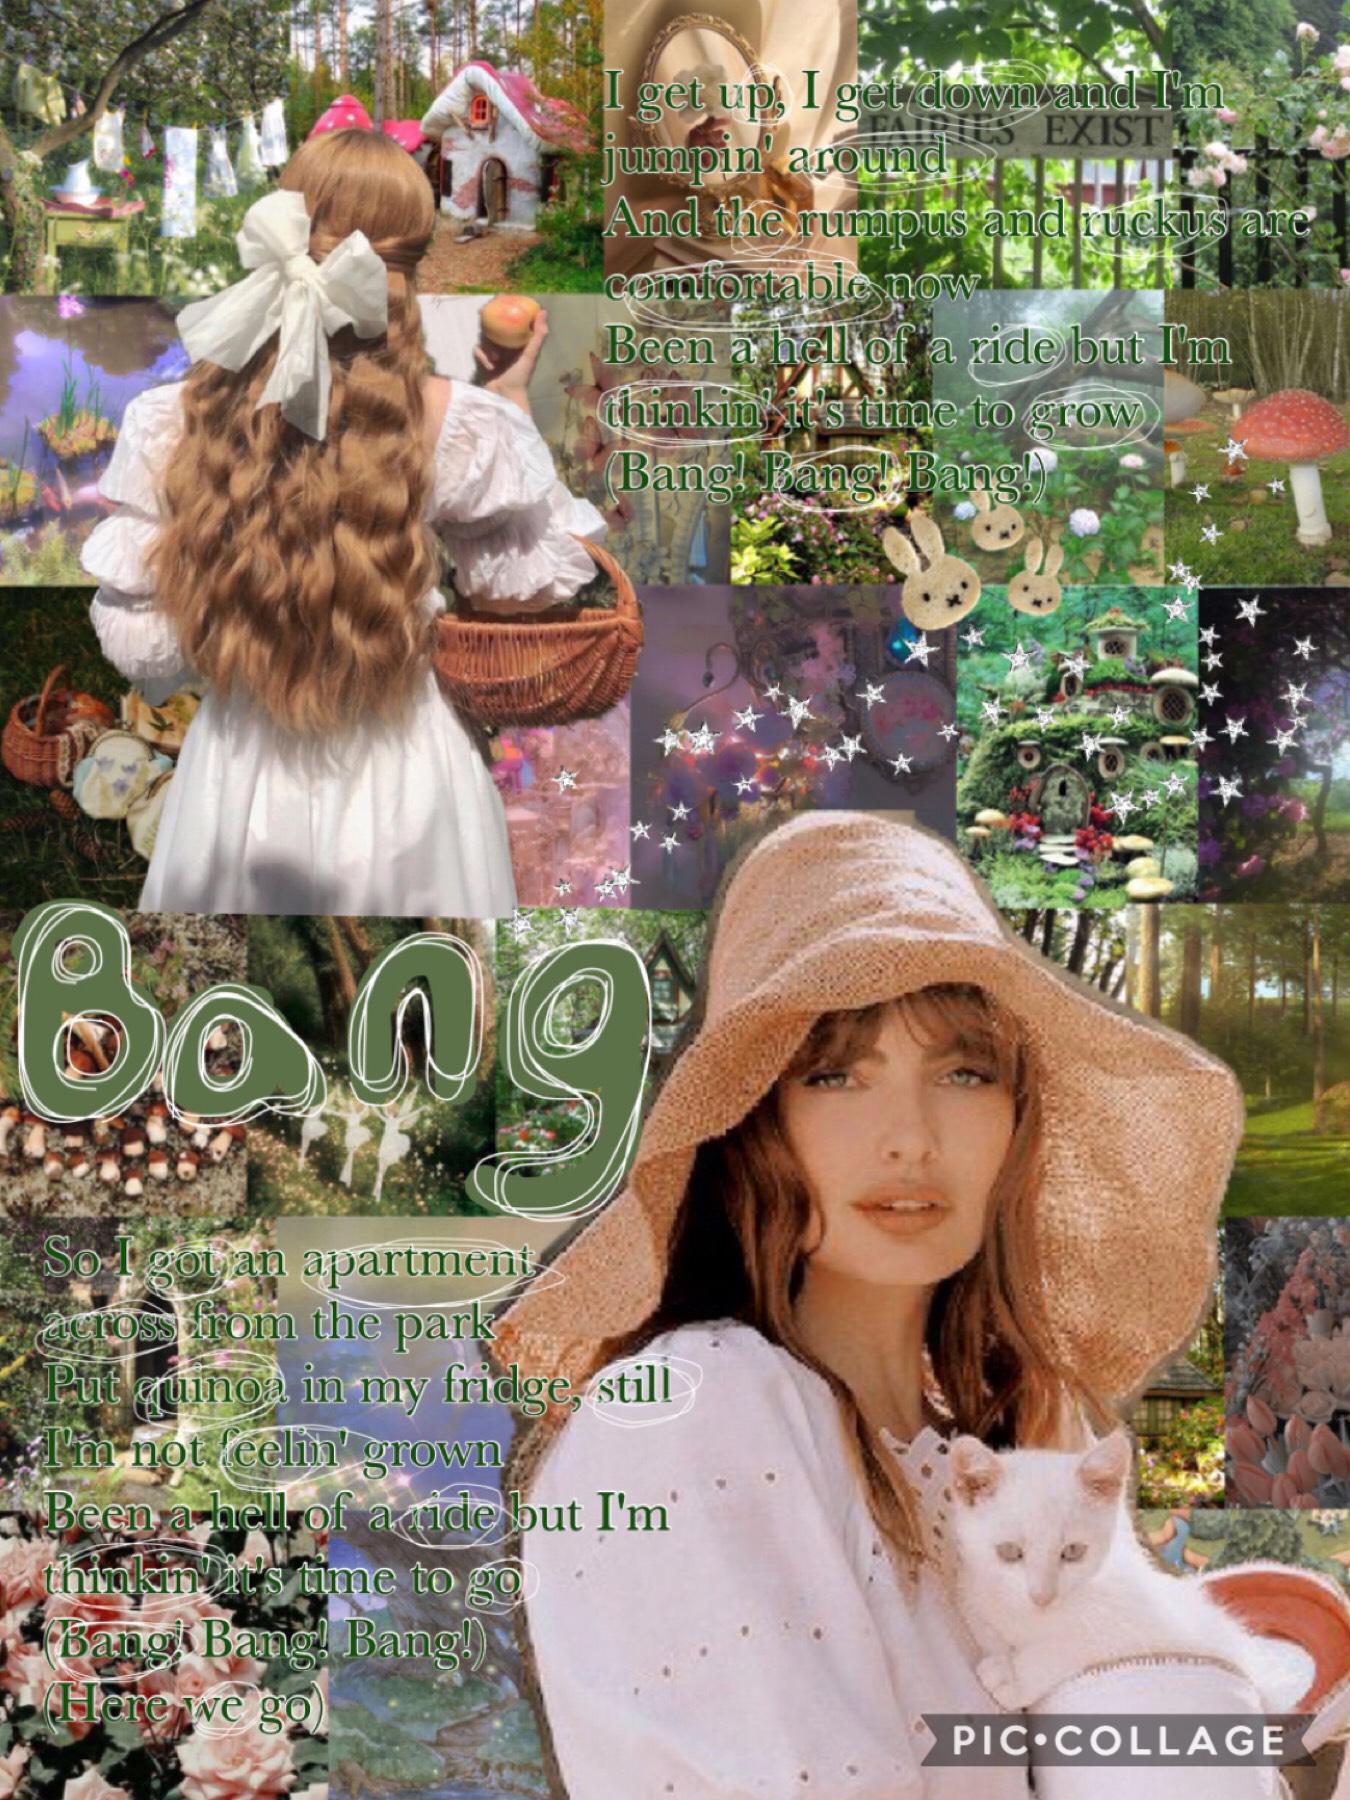 🌱TAP🌱
Collab with the amazing eunioa! She did the gorgeous background and I did the quote! Go follow her and check out some of her collages! (5/13/21)